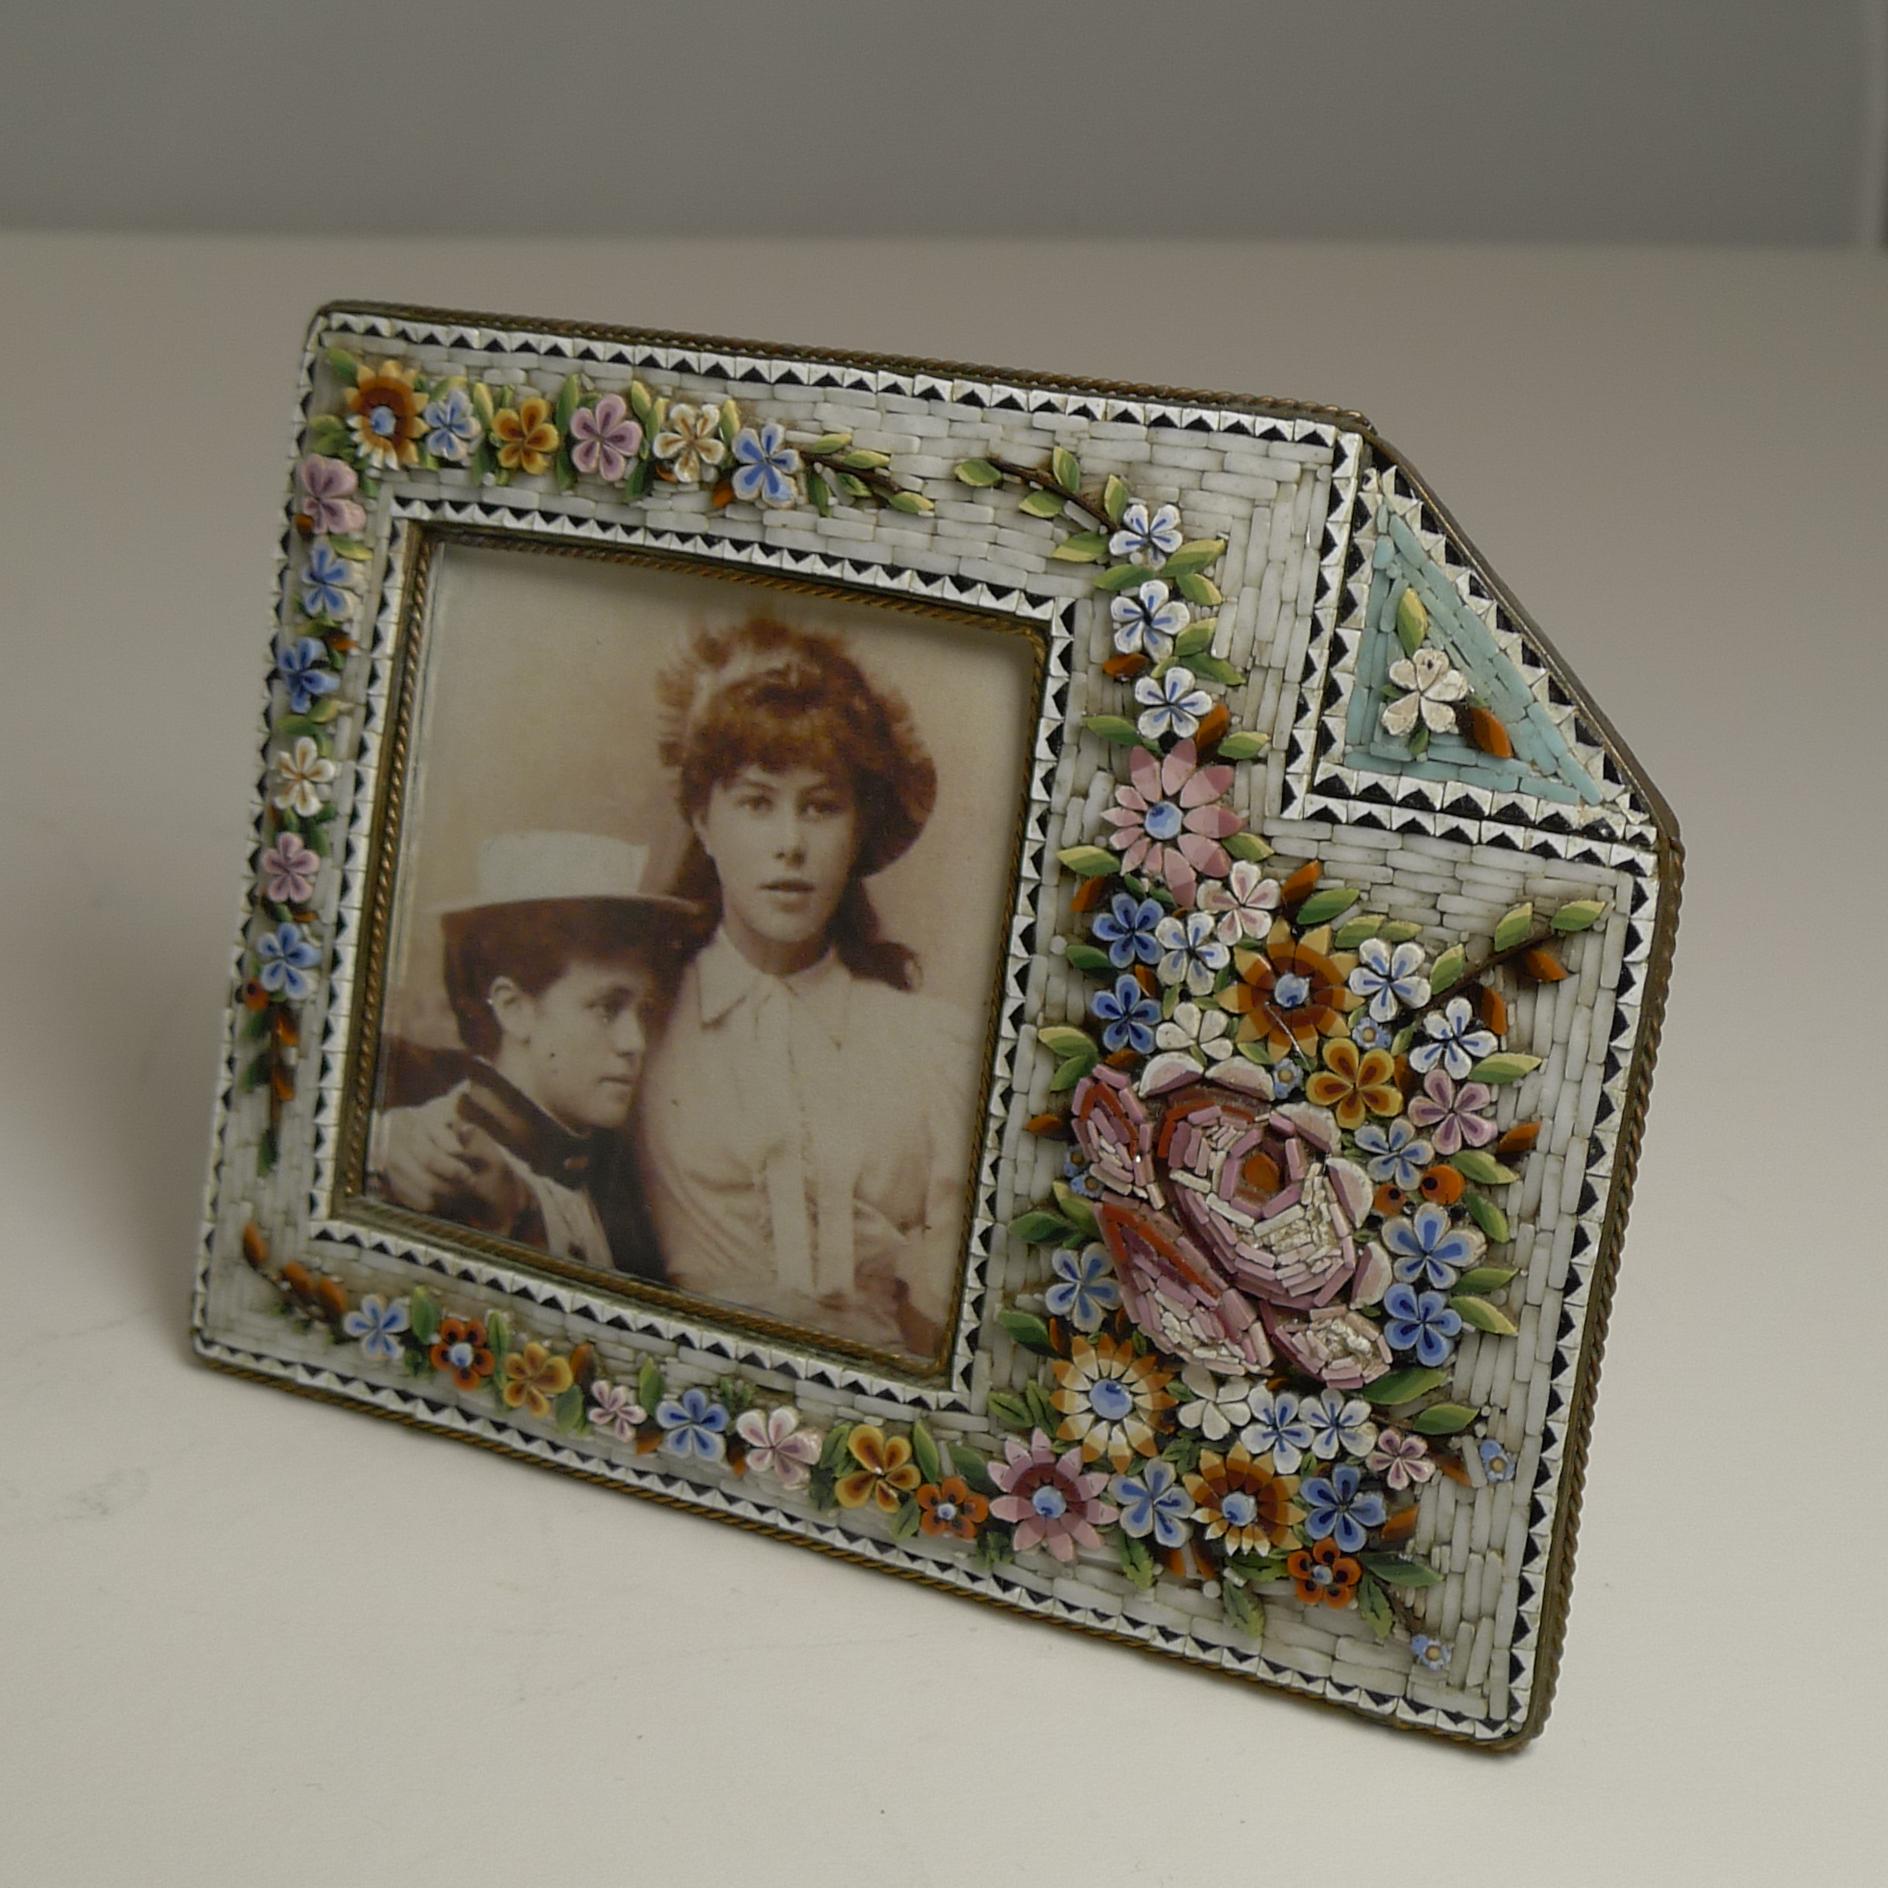 A charming and unusual Italian Micro-Mosaic photograph or picture frame with its 